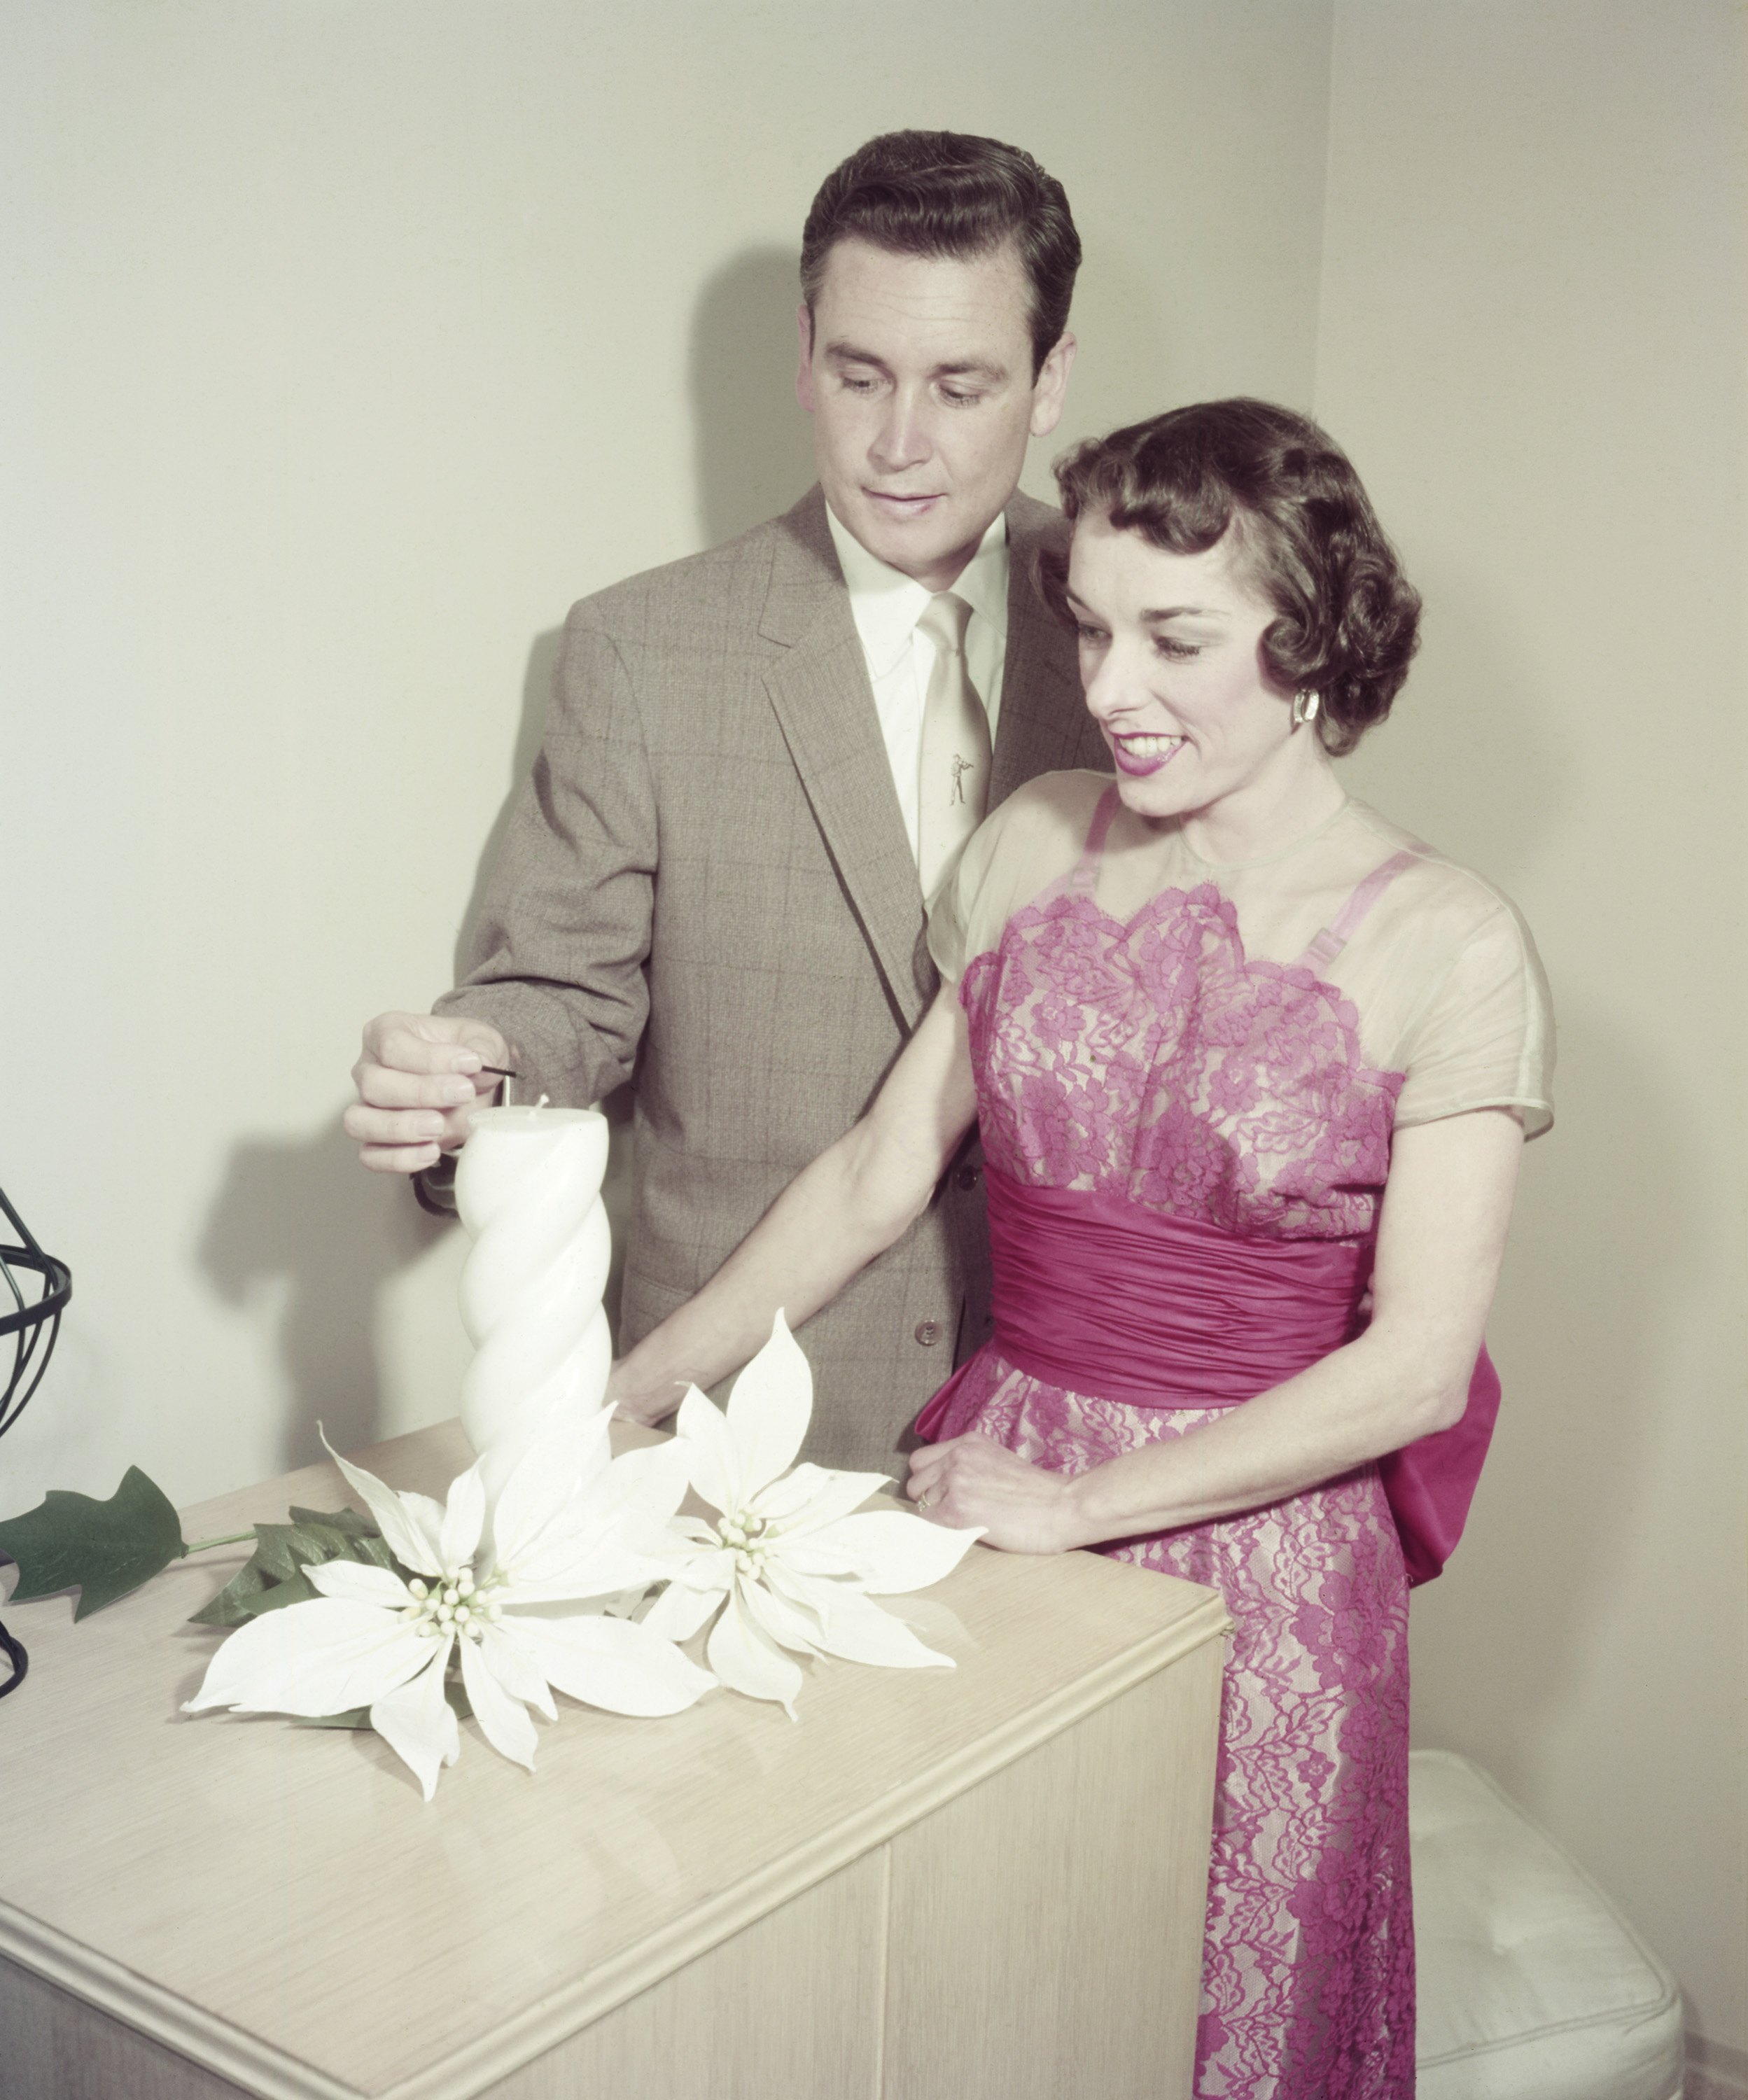 Bob Barker and Dorothy Jo Gideon lighting a candle | Source: Getty Images